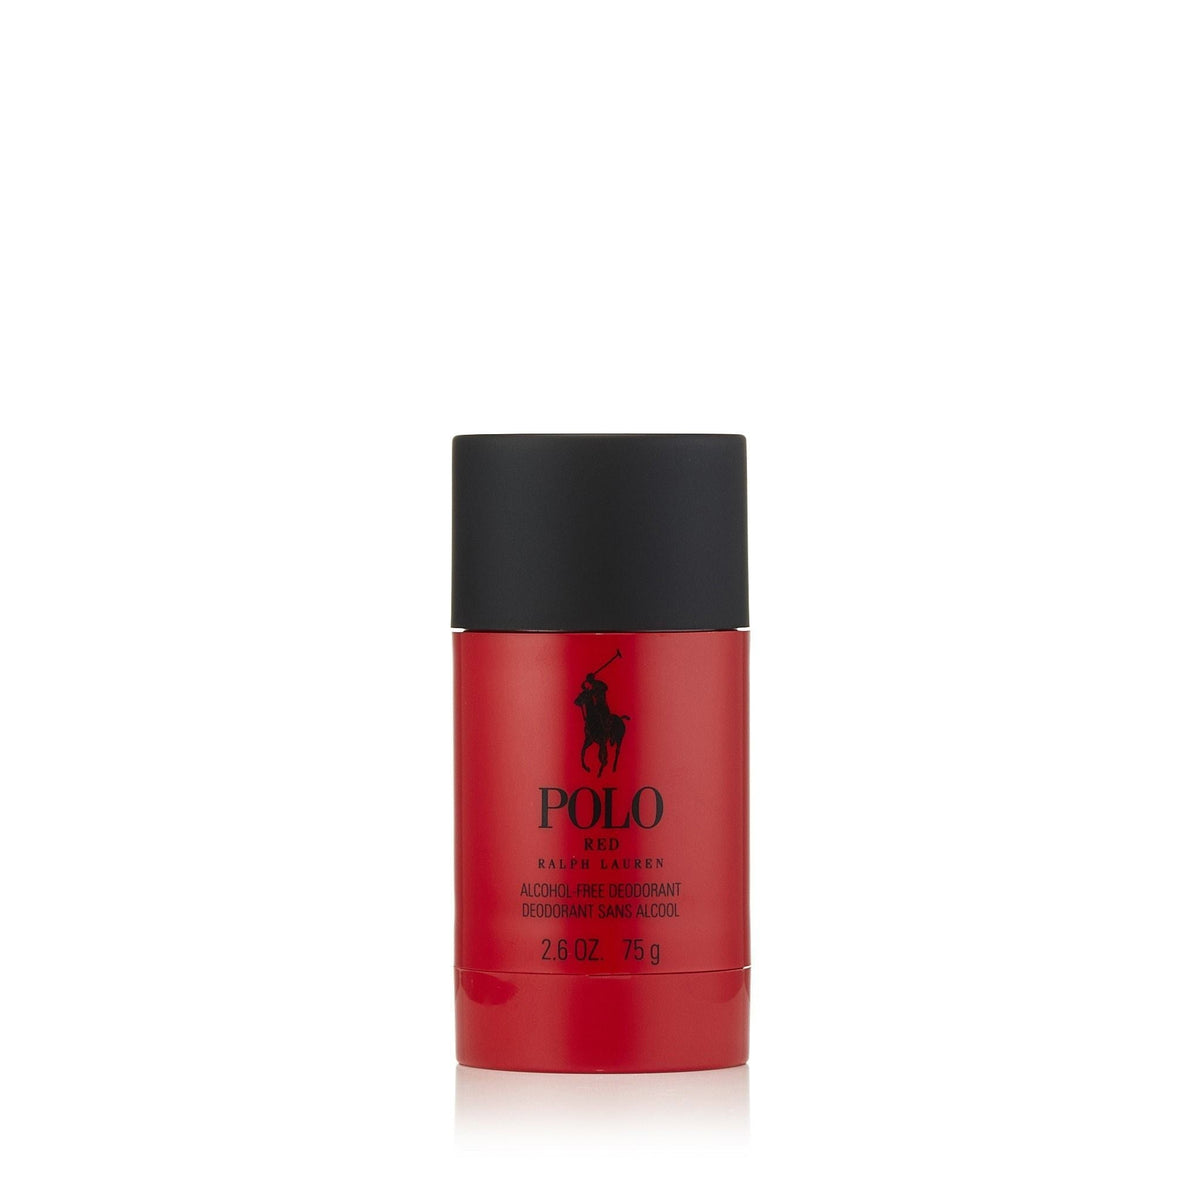 Polo Red Deodorant for Men by Ralph Lauren 2.6 oz.